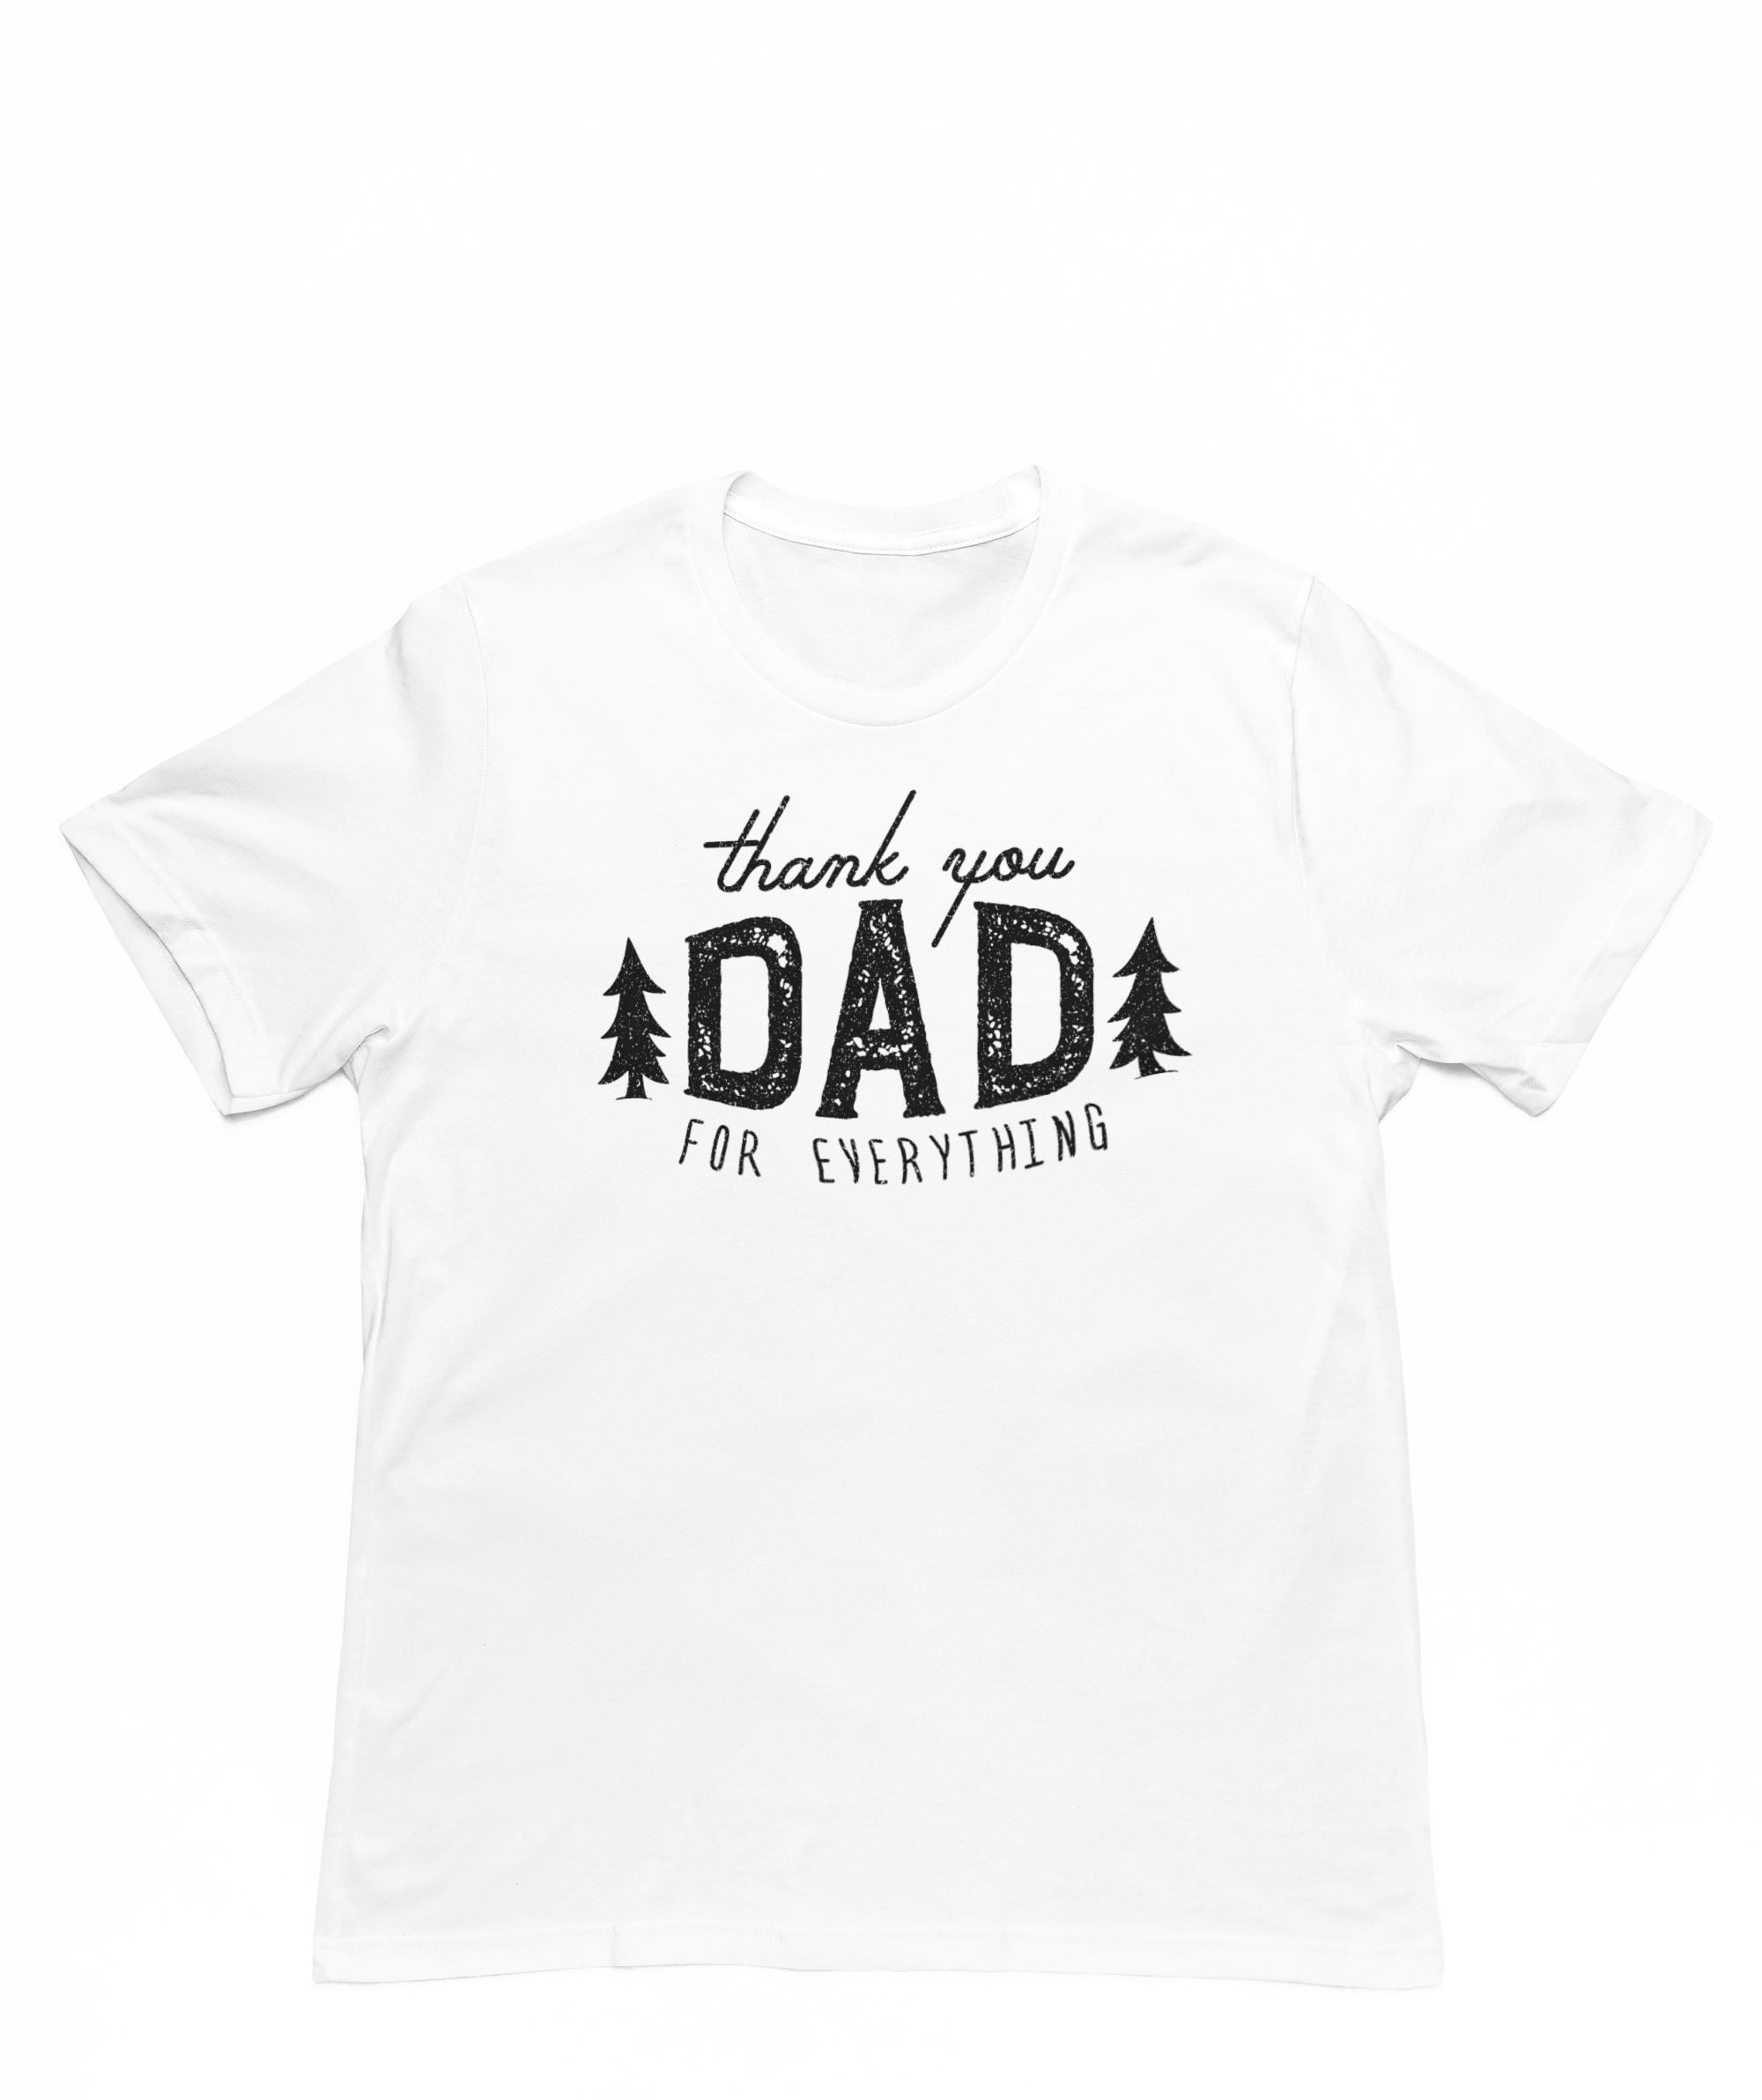 Thank you Dad t-shirt - Father's Day gift